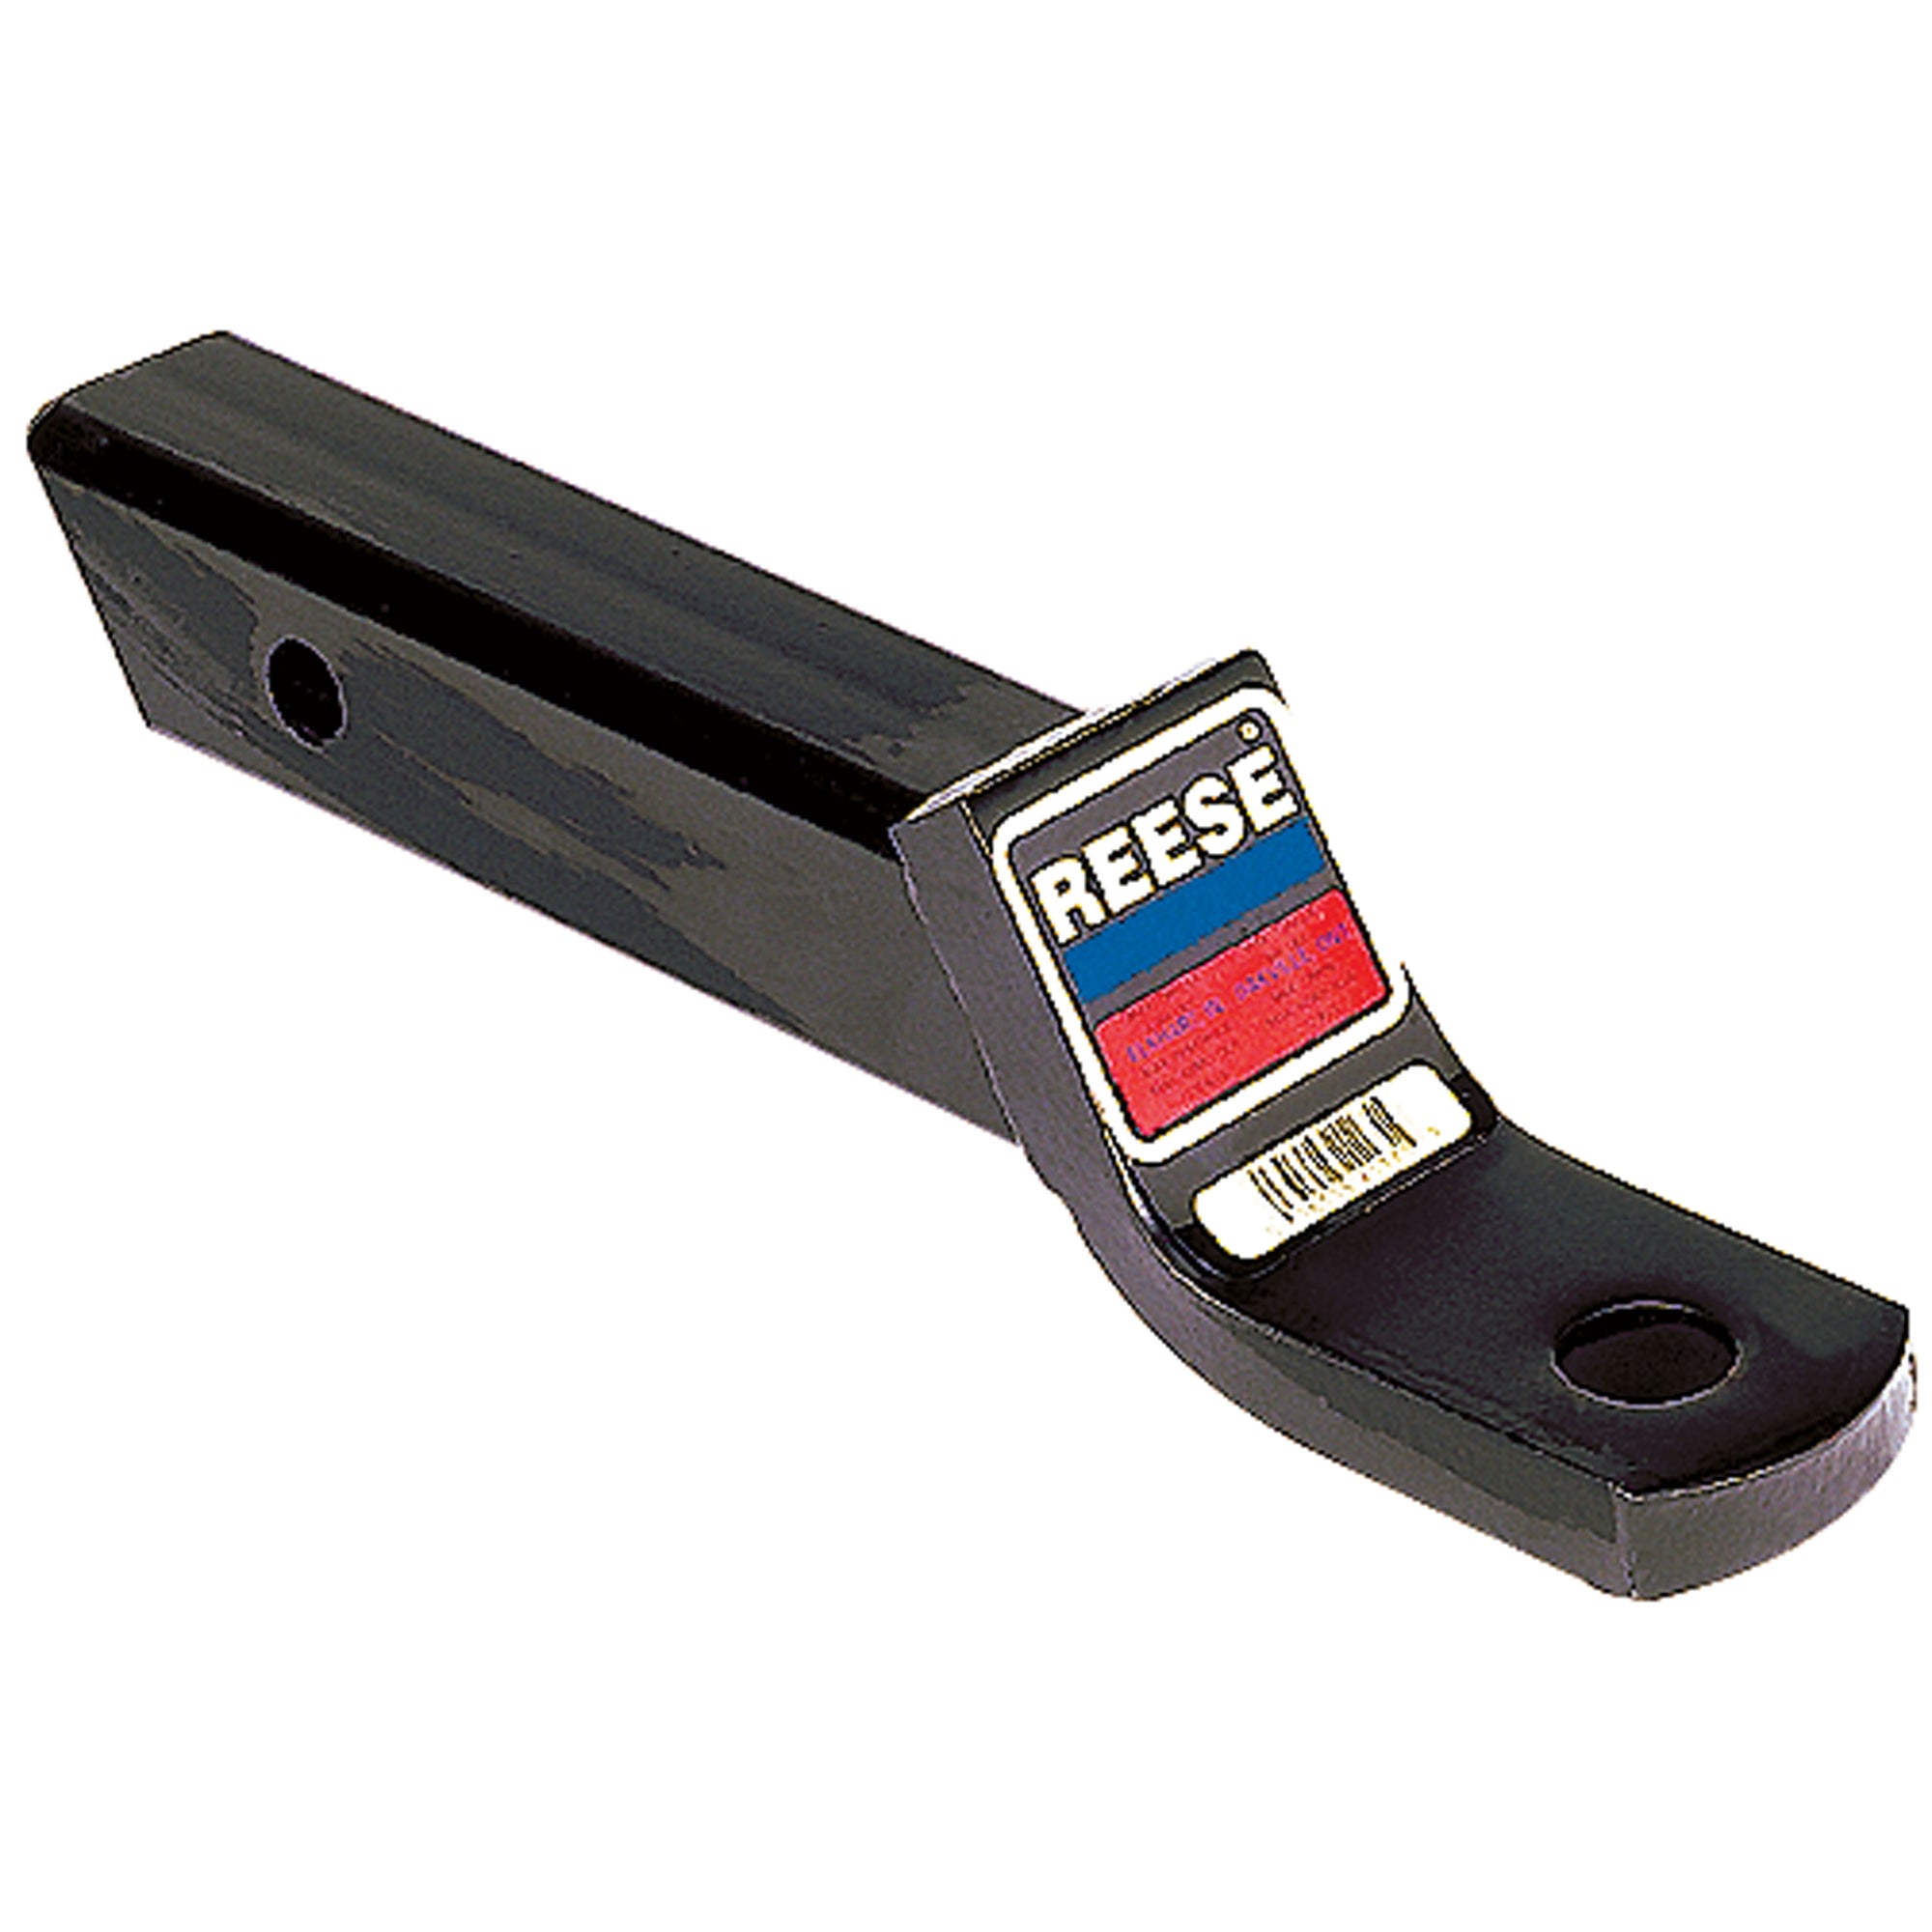 Reese 40342-006 Quick-Loading Ball Mount - 8-1/2" Length, 2" Drop, 3/4" Rise, 7500 lbs. GTW